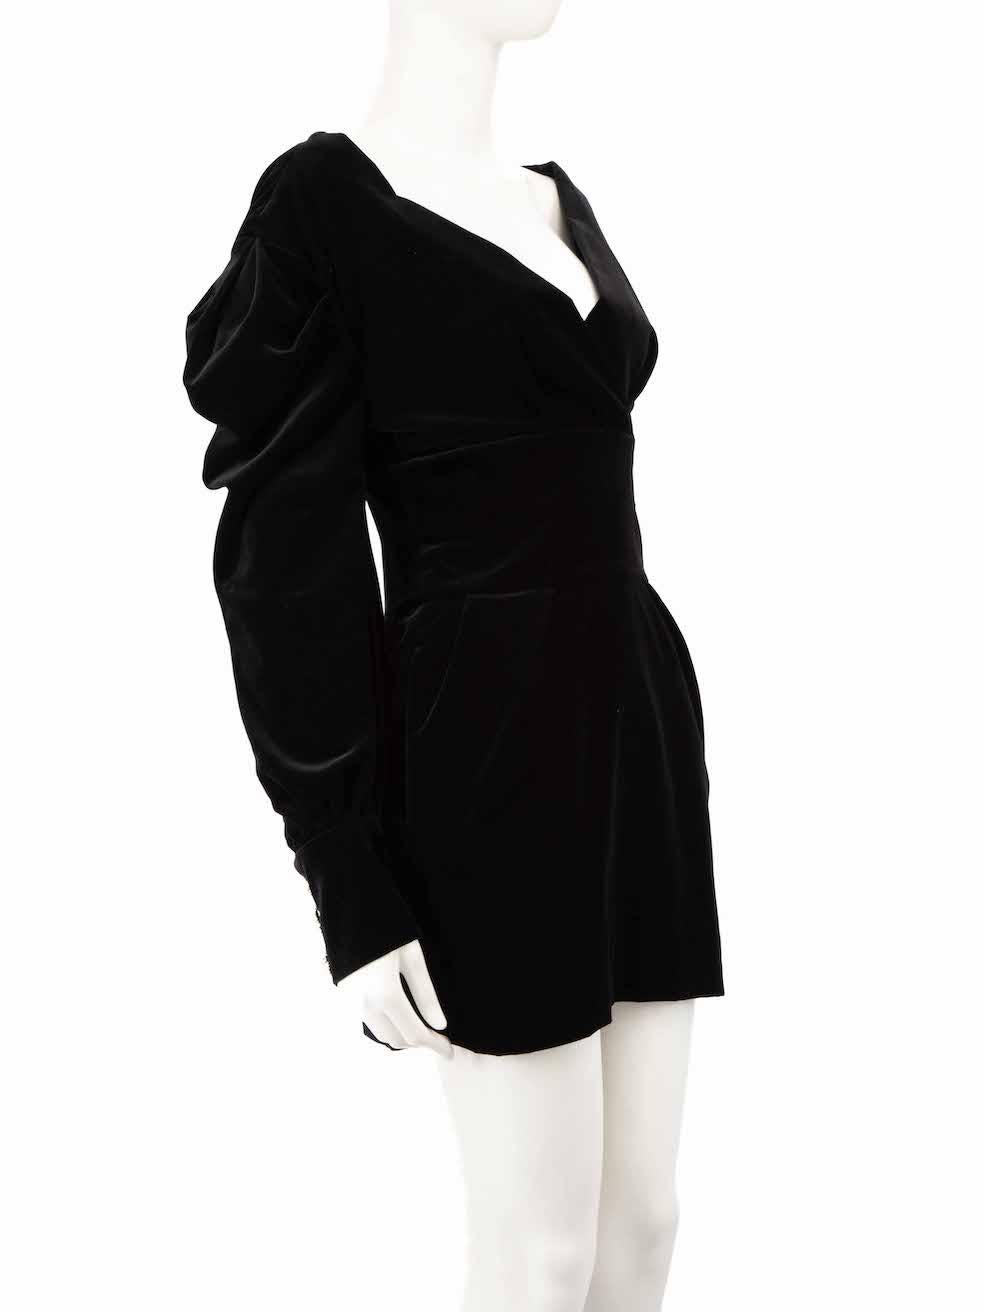 CONDITION is Very good. Hardly any visible wear to dress is evident on this used Alexandre Vauthier designer resale item.
 
 
 
 Details
 
 
 Black
 
 Velvet
 
 Dress
 
 Mini
 
 Long sleeves
 
 Buttoned cuffs
 
 V-neck
 
 Back zip and hook